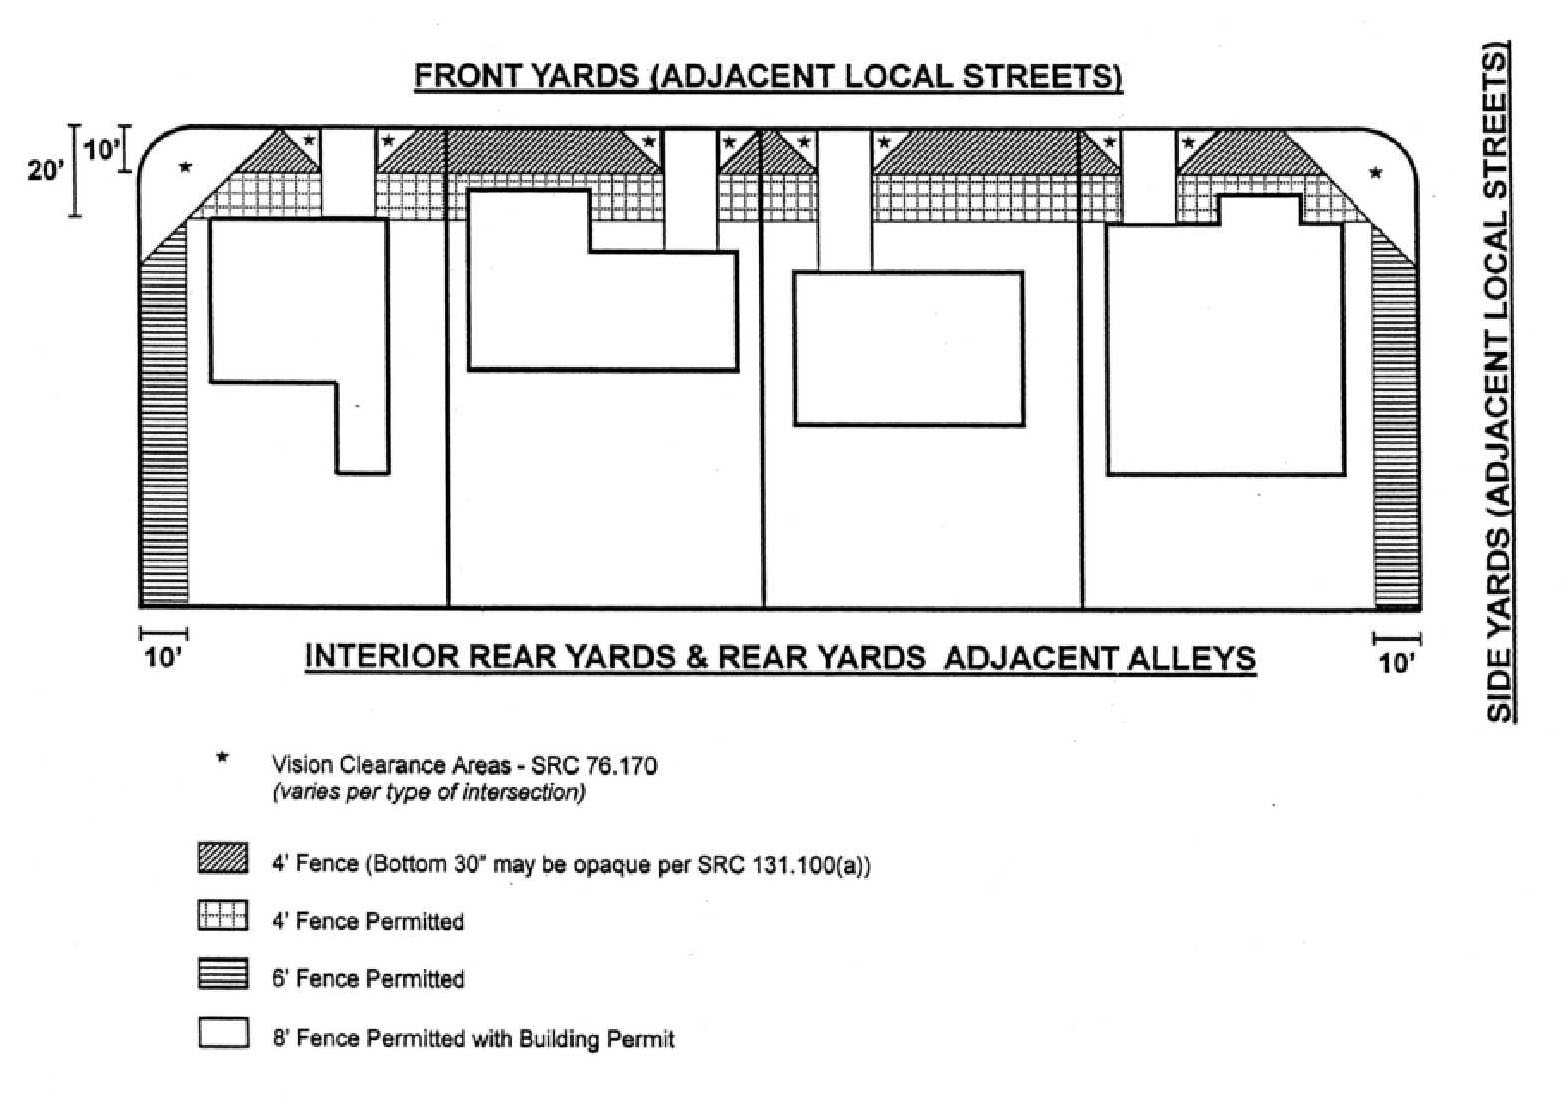 Drawing showing fence heights related to yard types and street locations